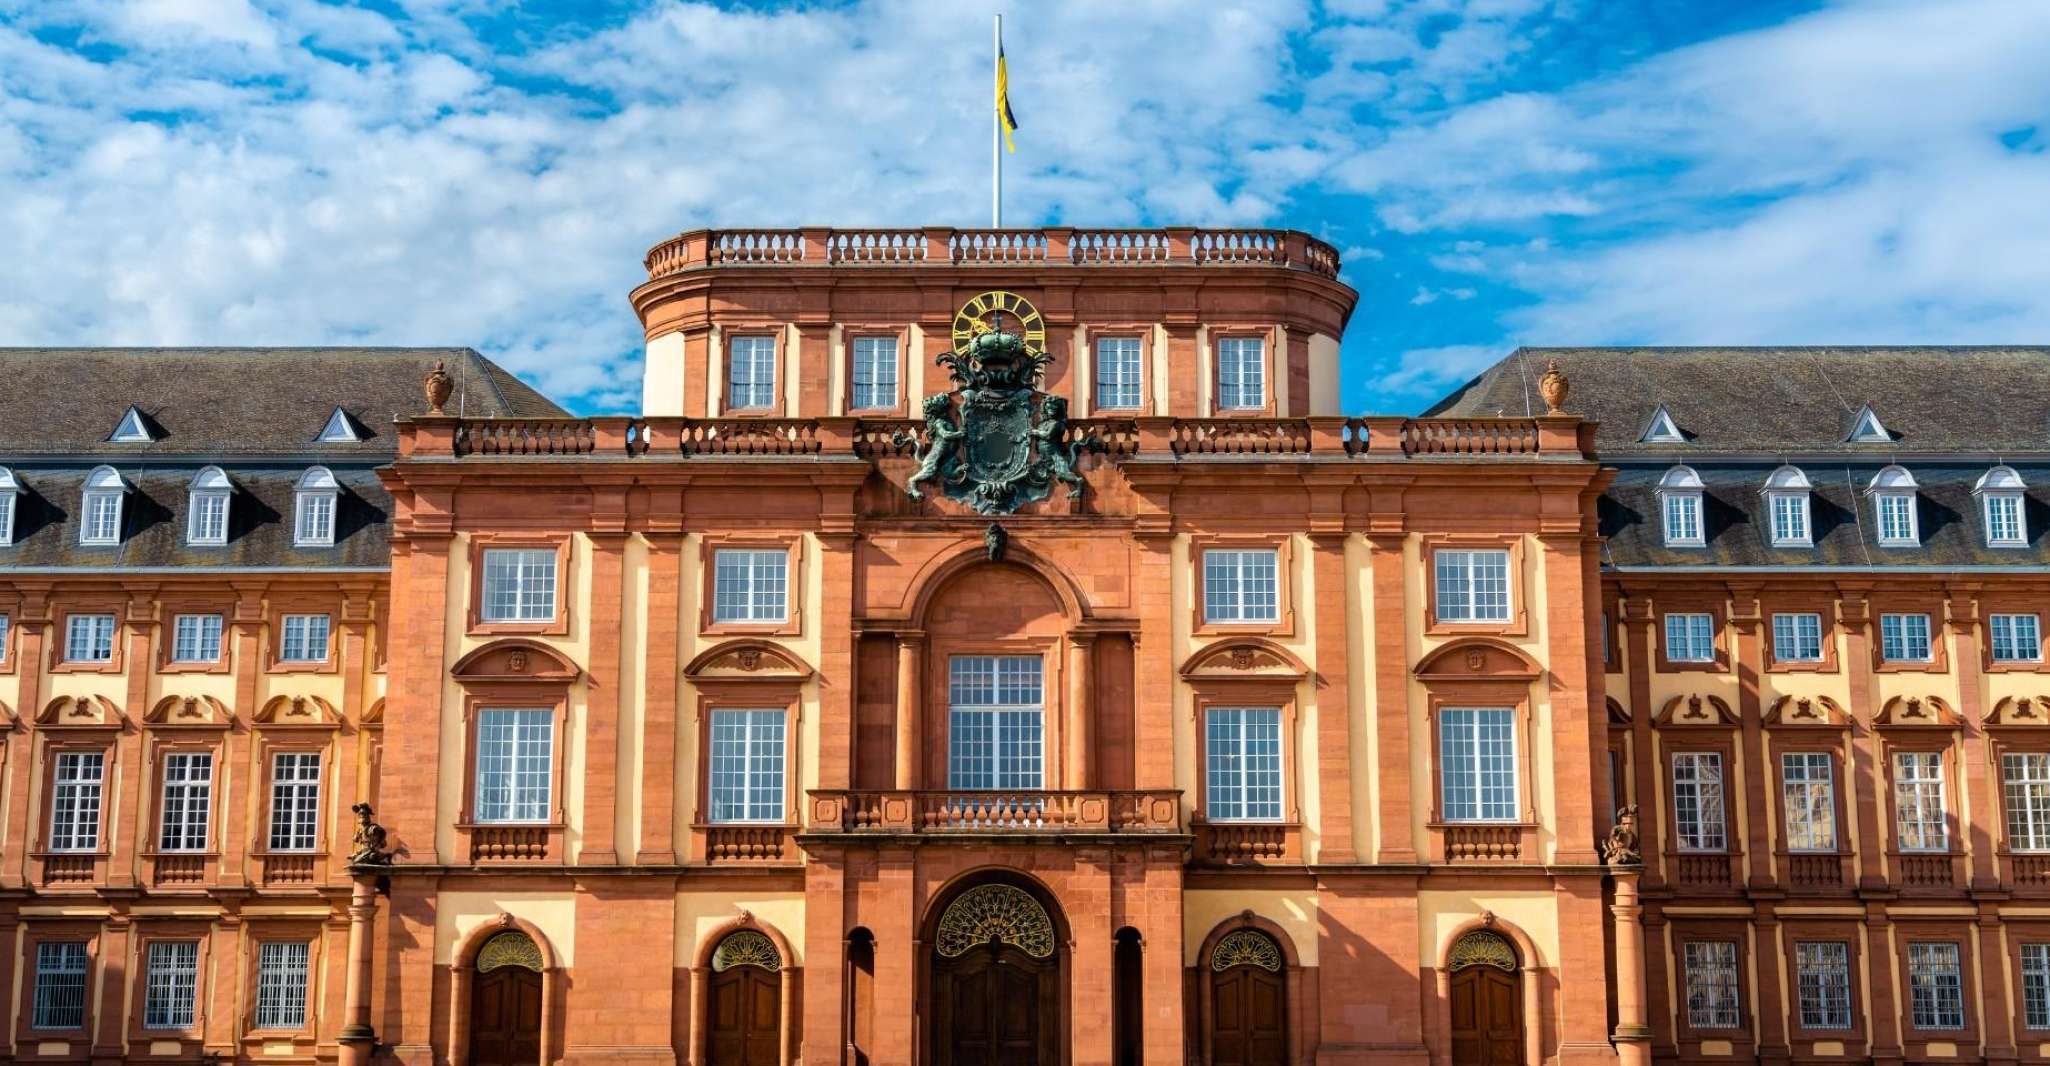 Self-guided city rally / scavenger hunt Mannheim in German - Housity